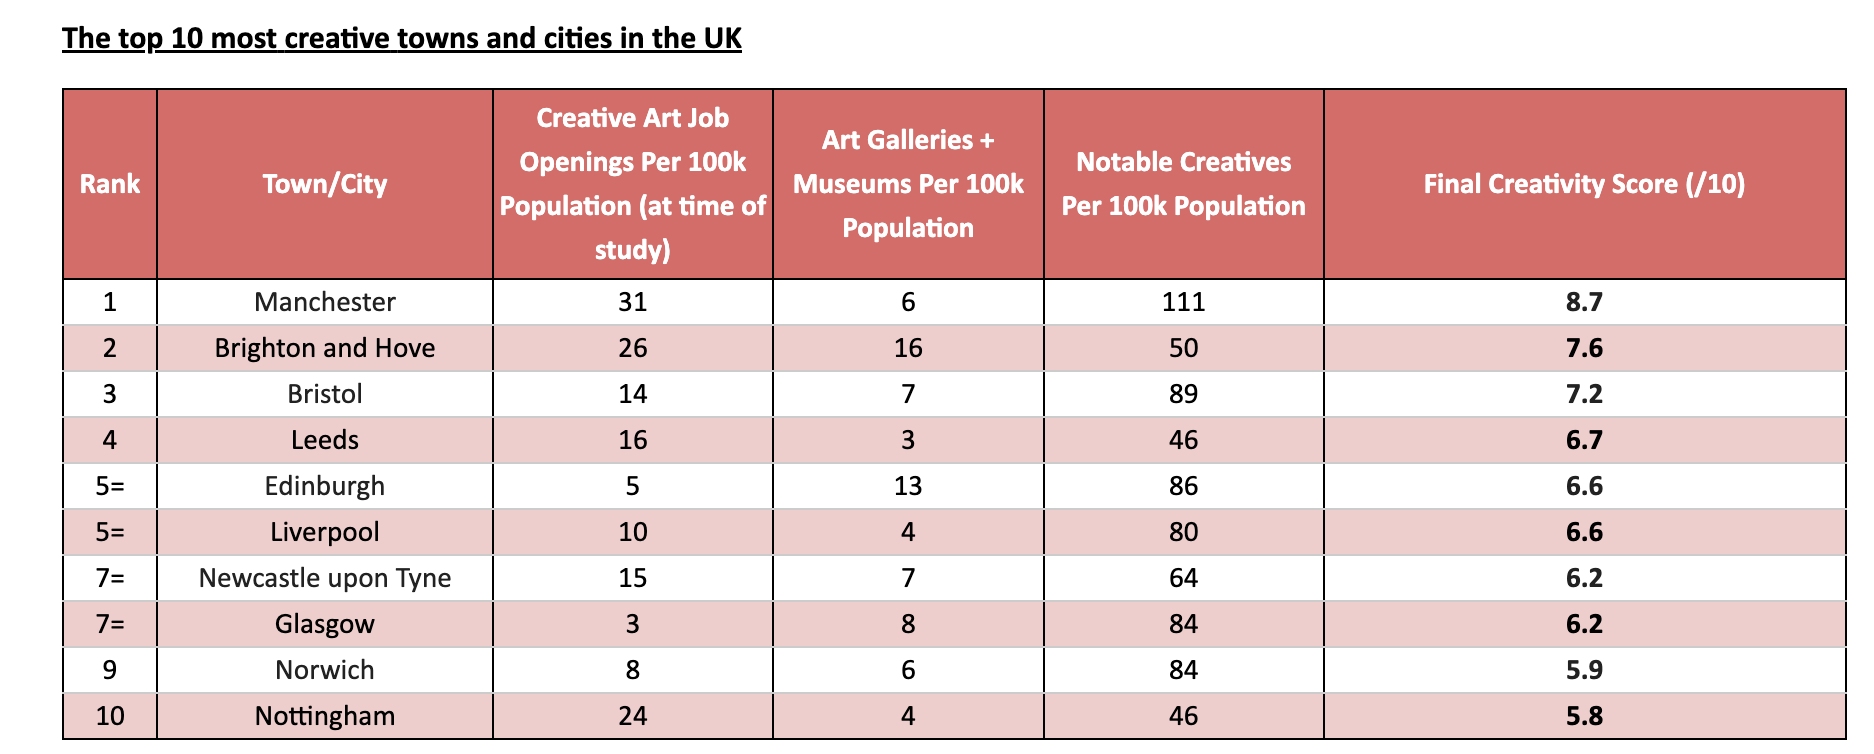 The_top_10_most_creative_towns_and_cities_in_the_UK.png